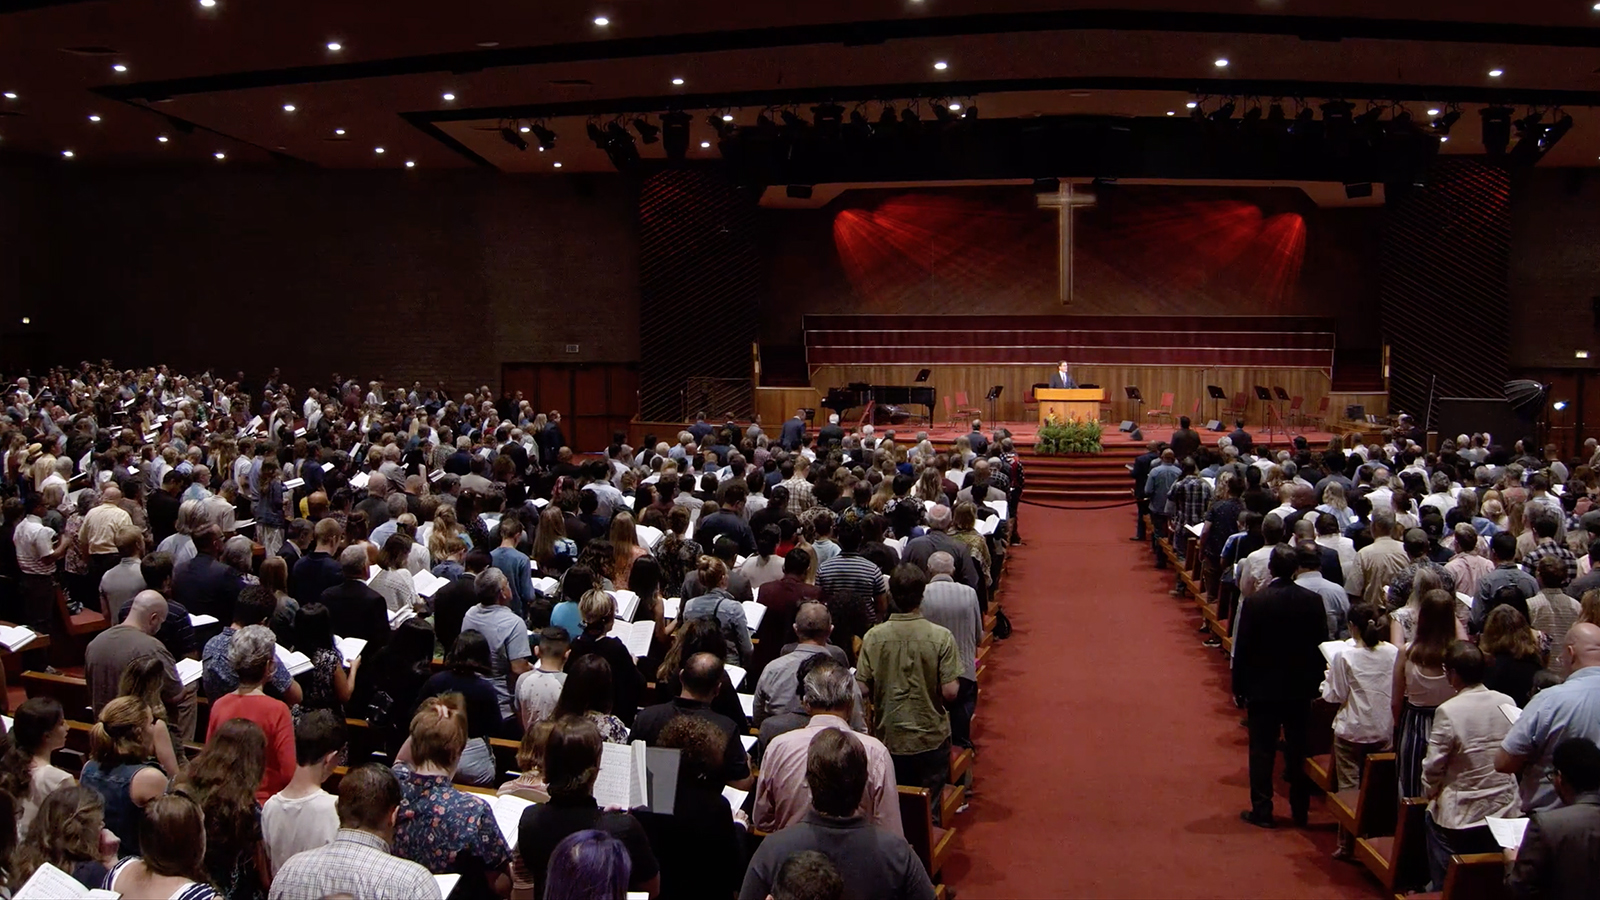 The Sunday morning service concludes at Grace Community Church in Sun Valley, California, July 26, 2020. Video screen grab via Vimeo/Grace Community Church